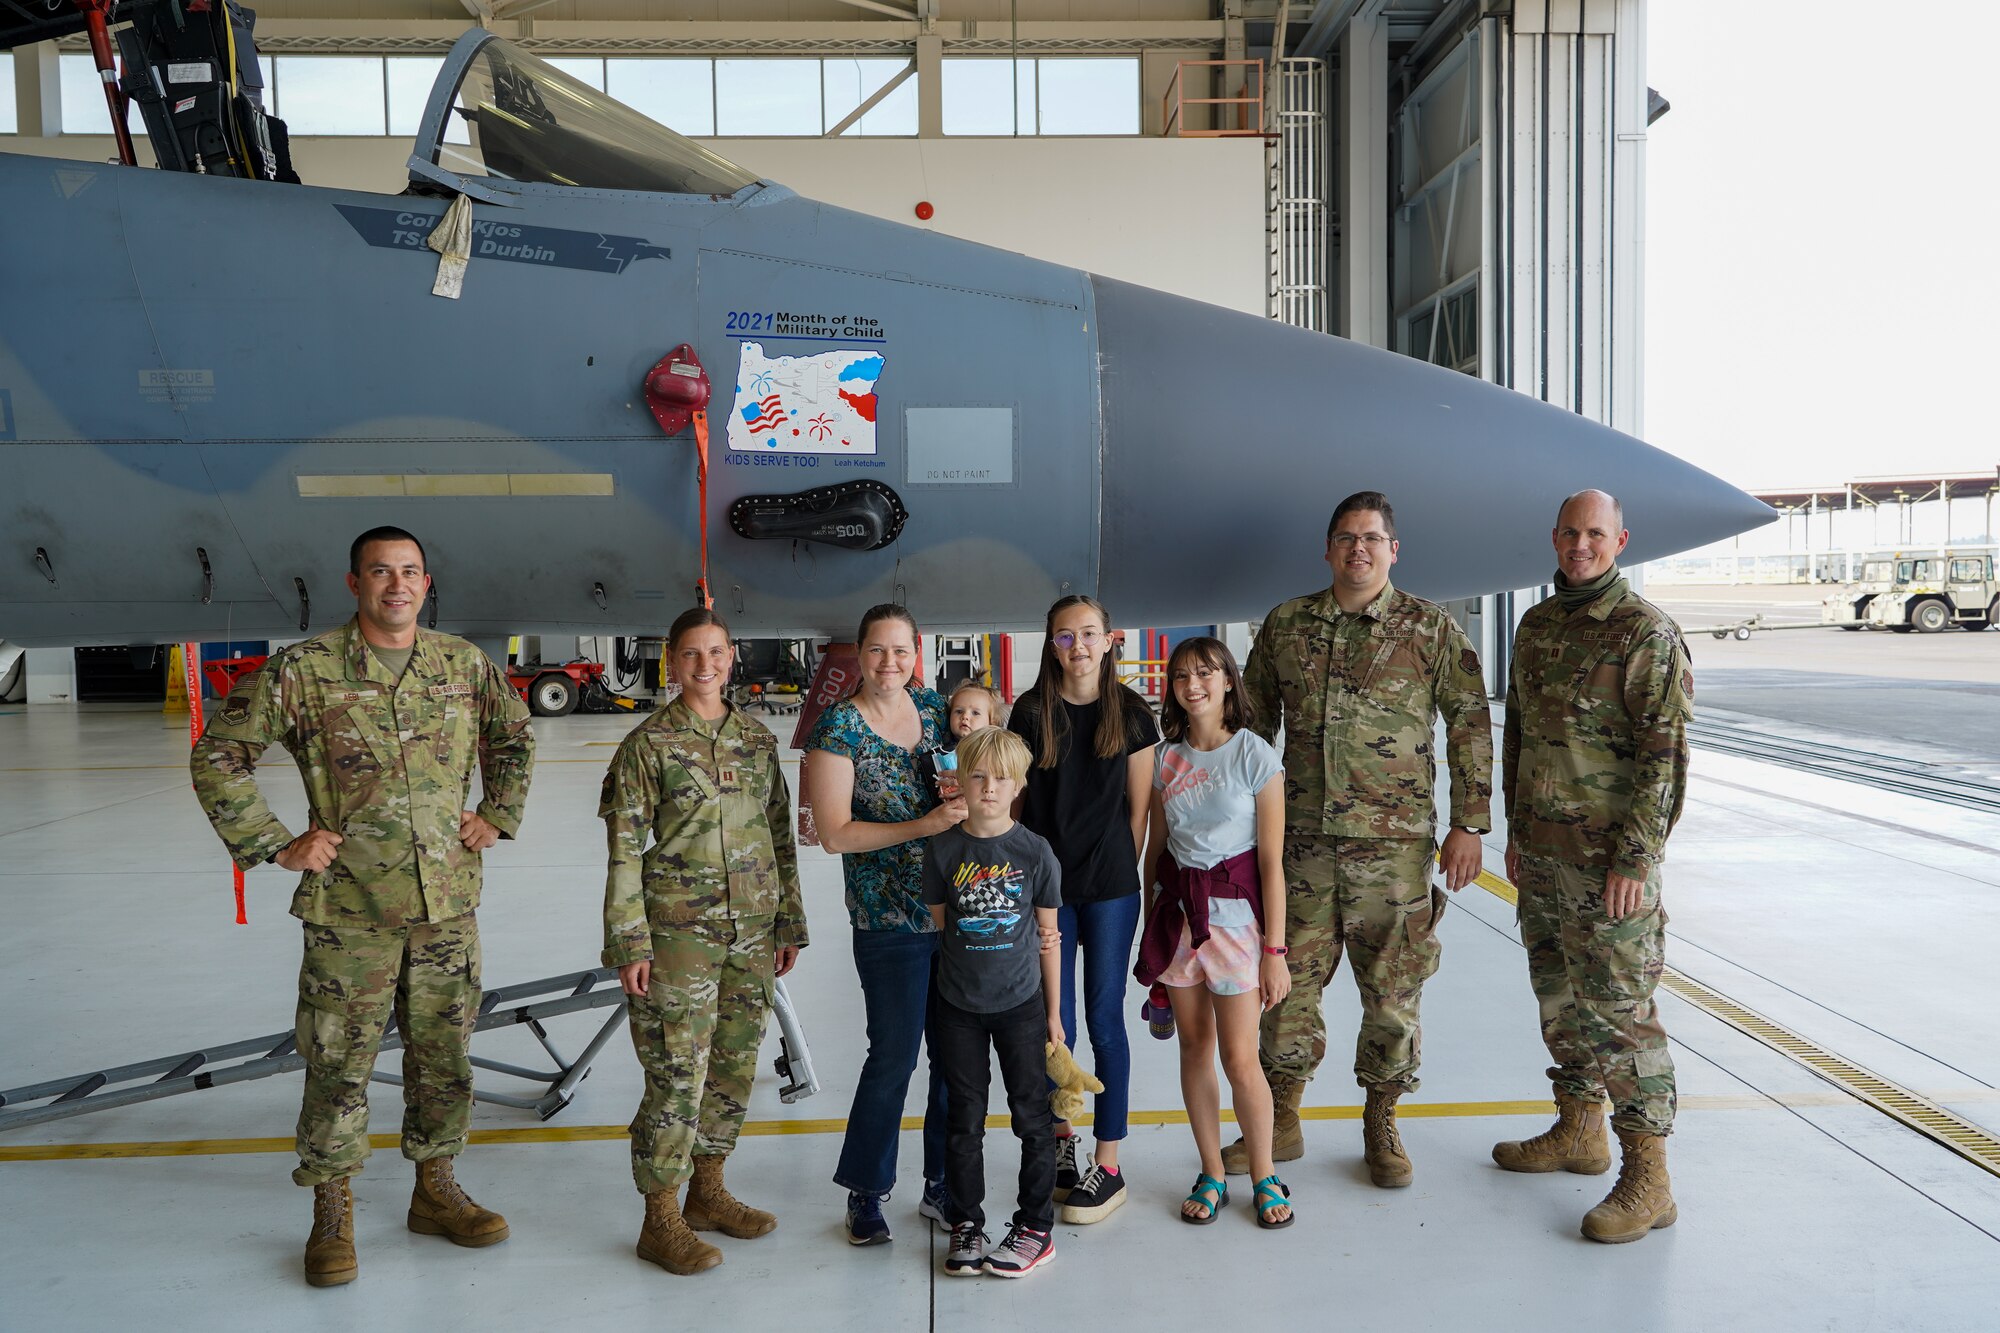 Leah Ketchum and her family along with members of the 142nd Maintenance Group pose for a photo in front of a 142nd Wing F-15 Eagle that now displays her artwork on its nose on August 12, 2021 in Portland, Ore. The 142nd Wing and the 173rd Fighter Wing both held contests in support of Month of the Military Child in which each wing chose one winner to have their designs applied to fighter jets at their respective wings. (U.S. Air National Guard Photo by Staff. Sgt. Alexander Frank)